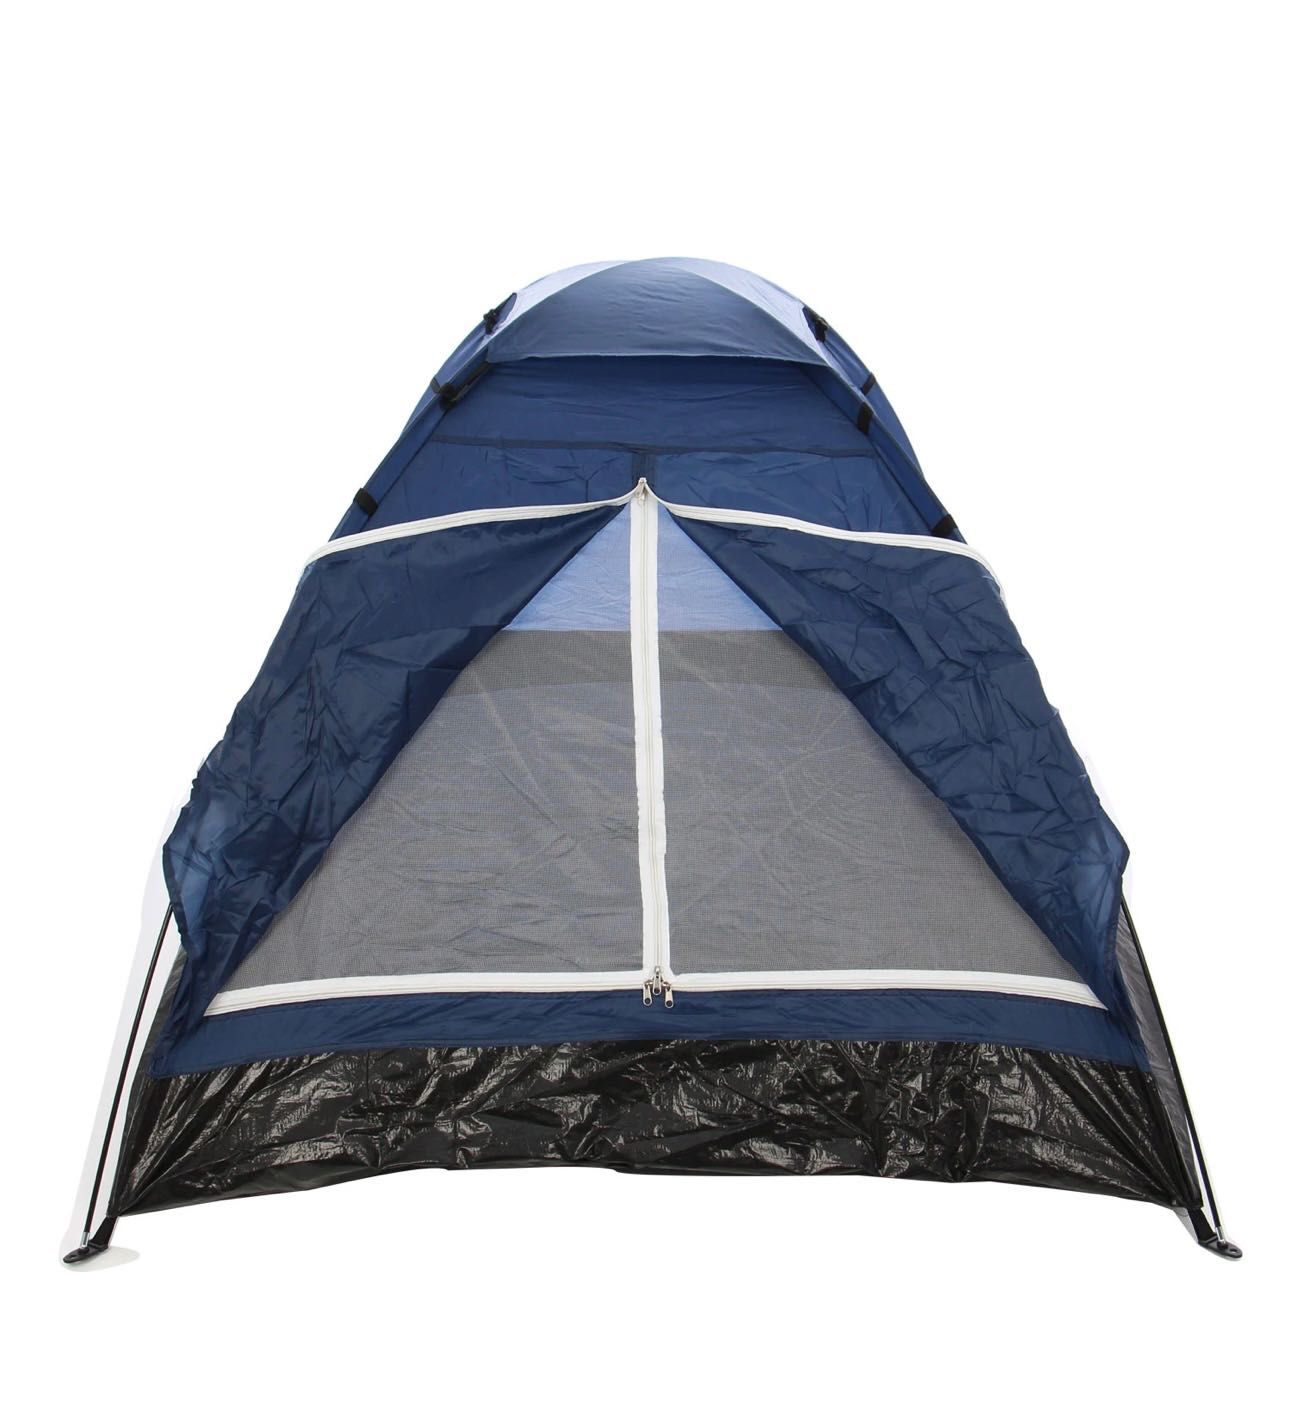 Cort camping 2 persoane, poliester, 200 x 140 x 100 cm